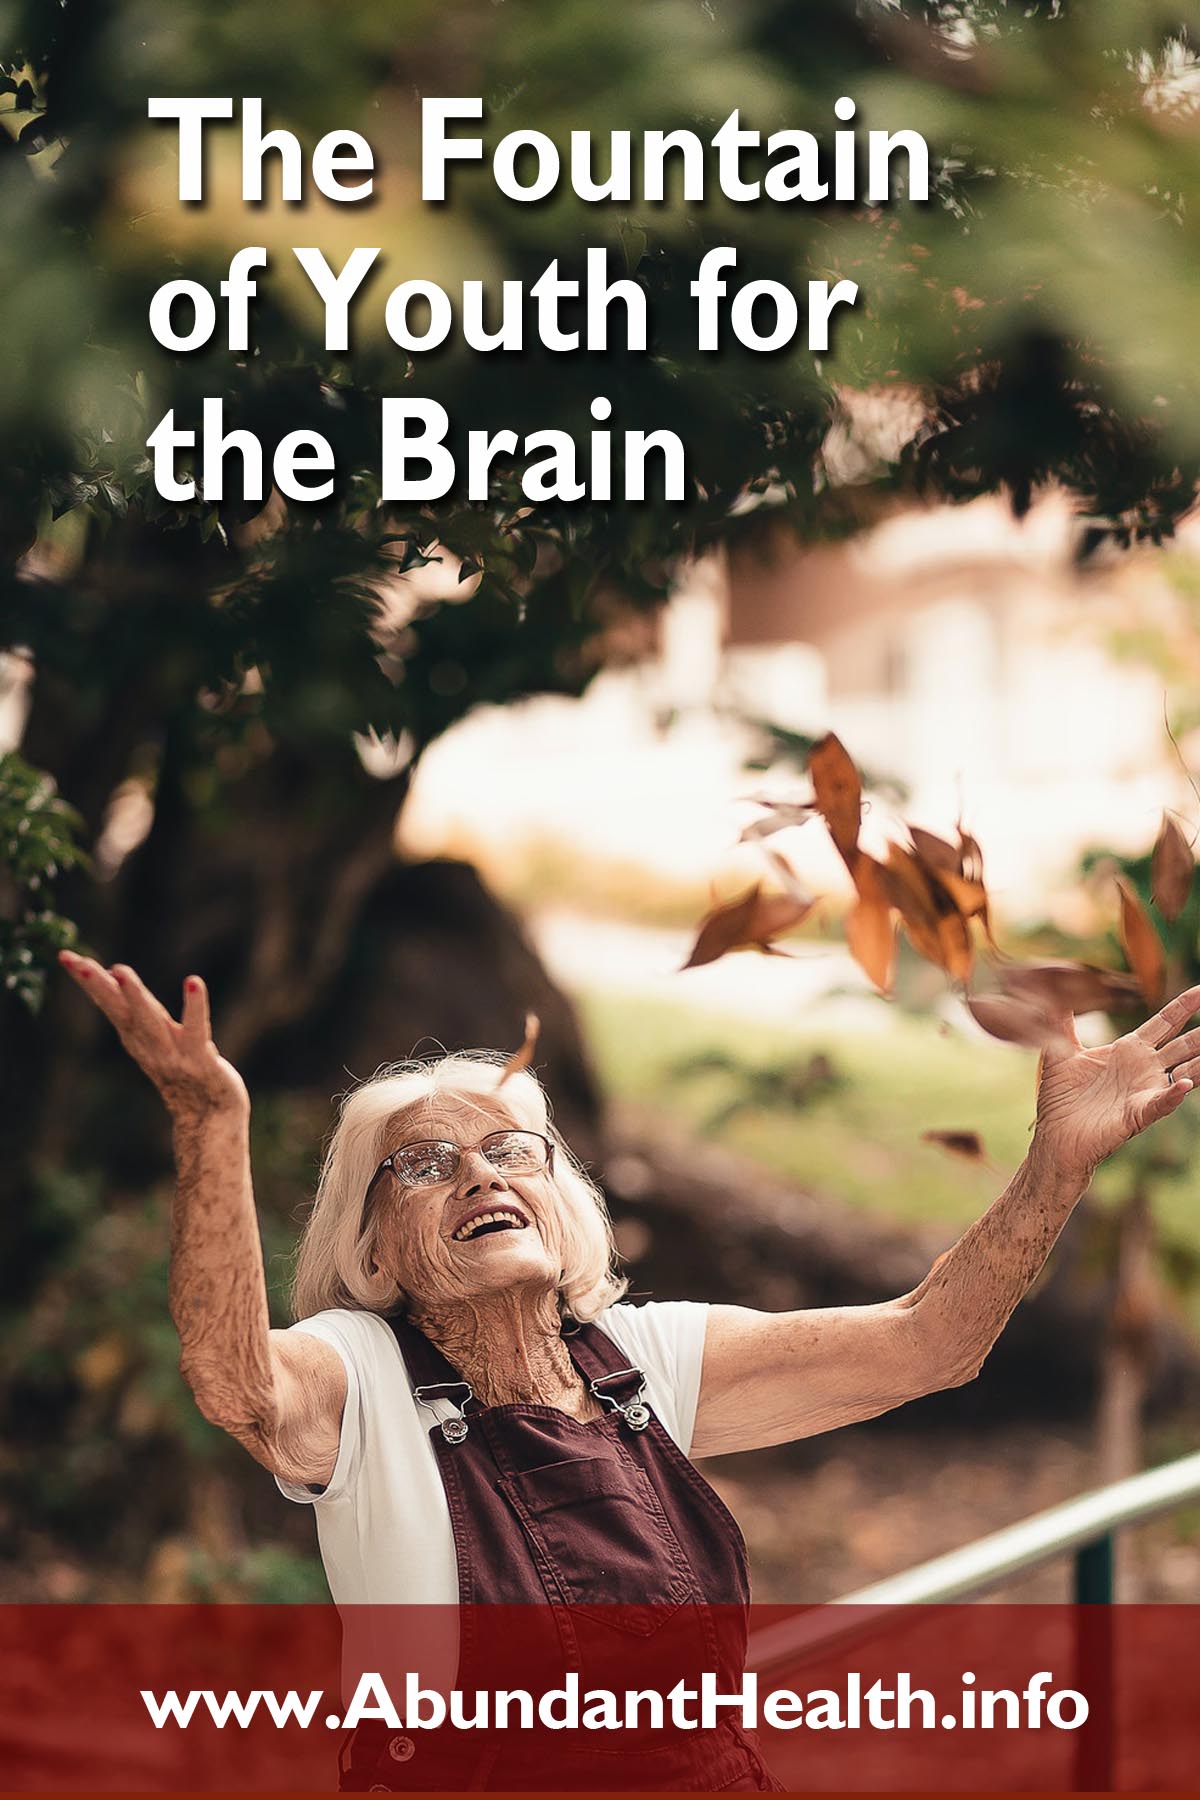 The Fountain of Youth for the Brain